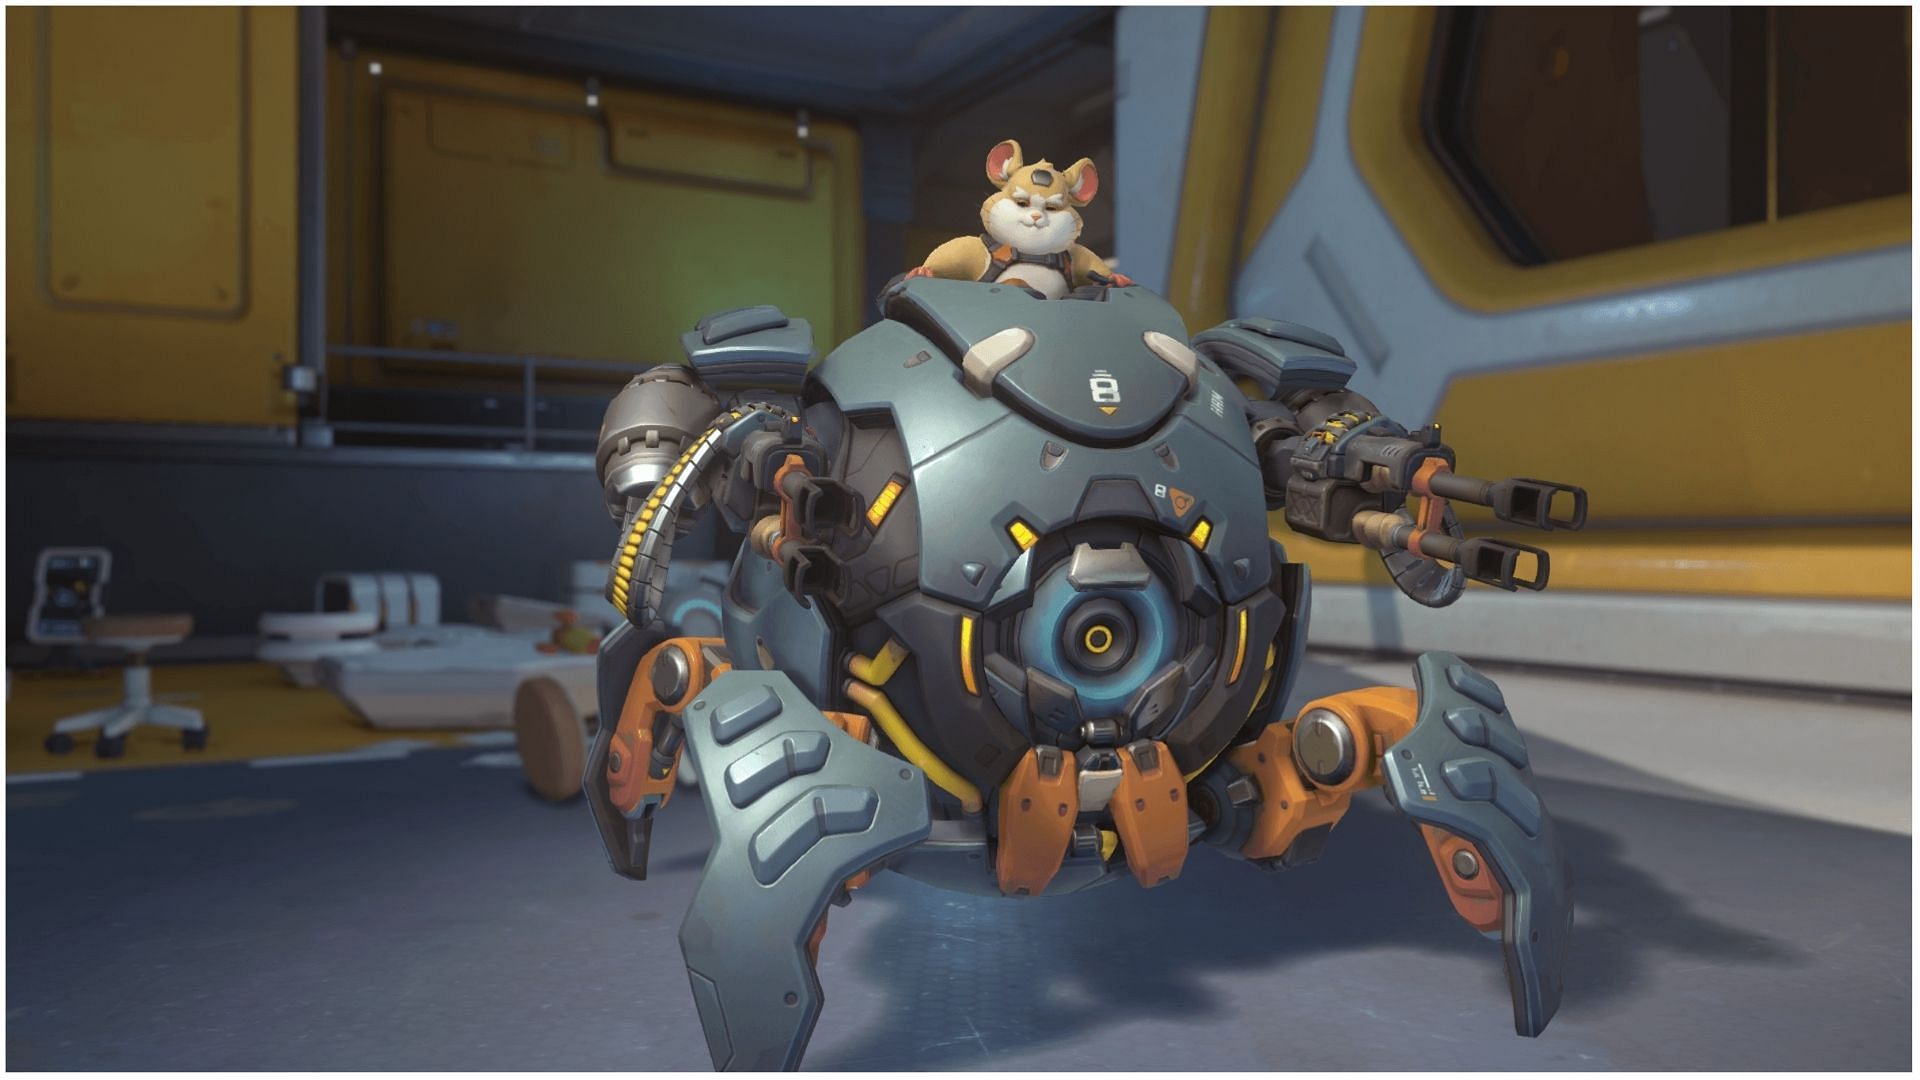 Wrecking Ball as seen in Overwatch (Image via Activision Blizzard)